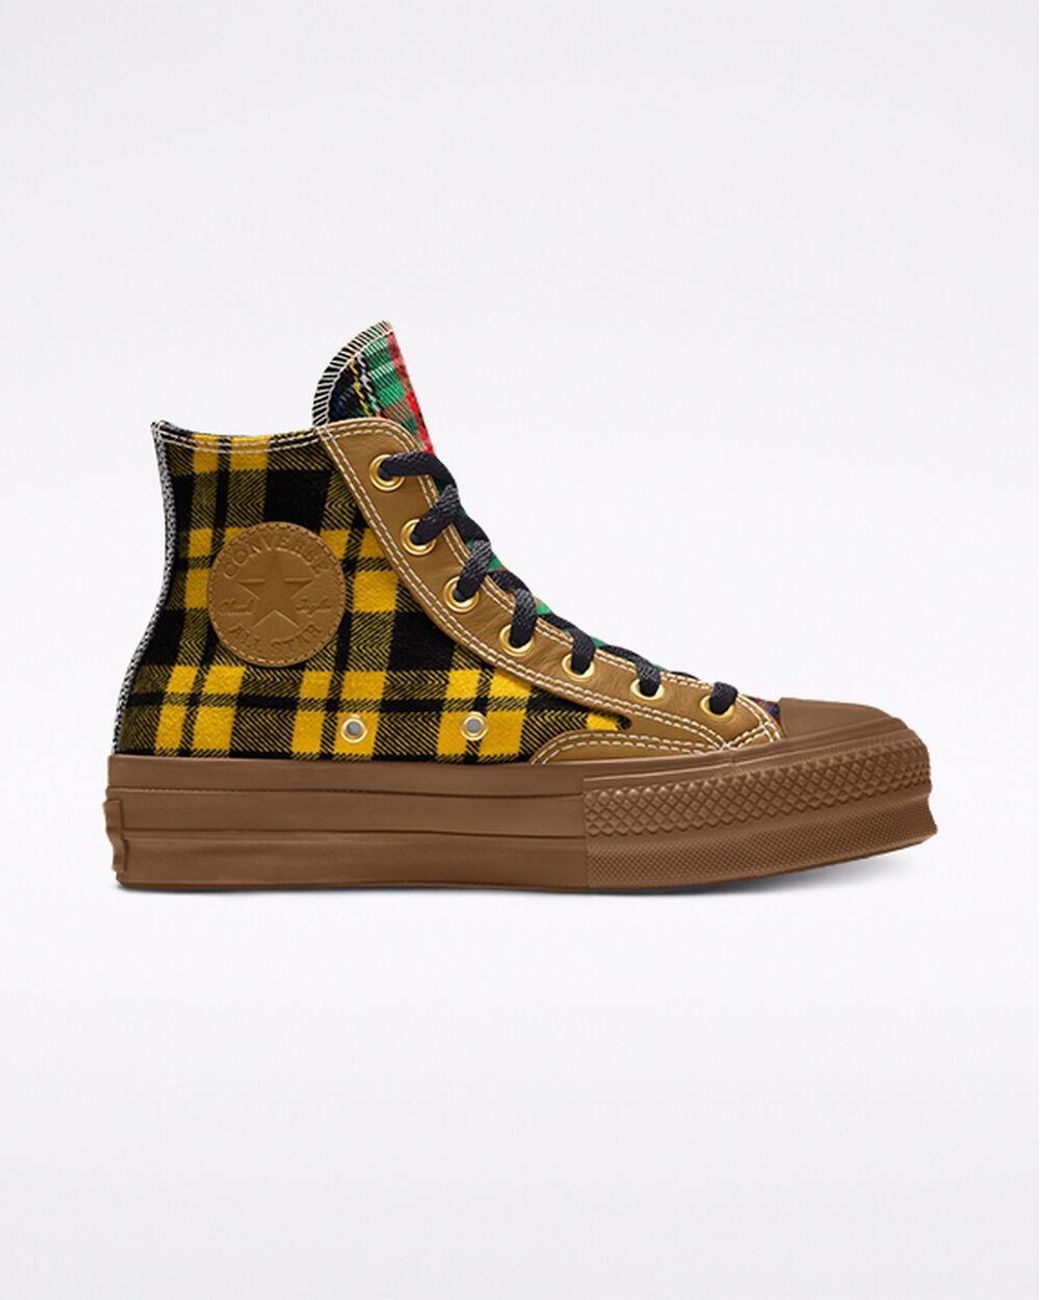 Arriba 107+ imagen brown and plaid converse